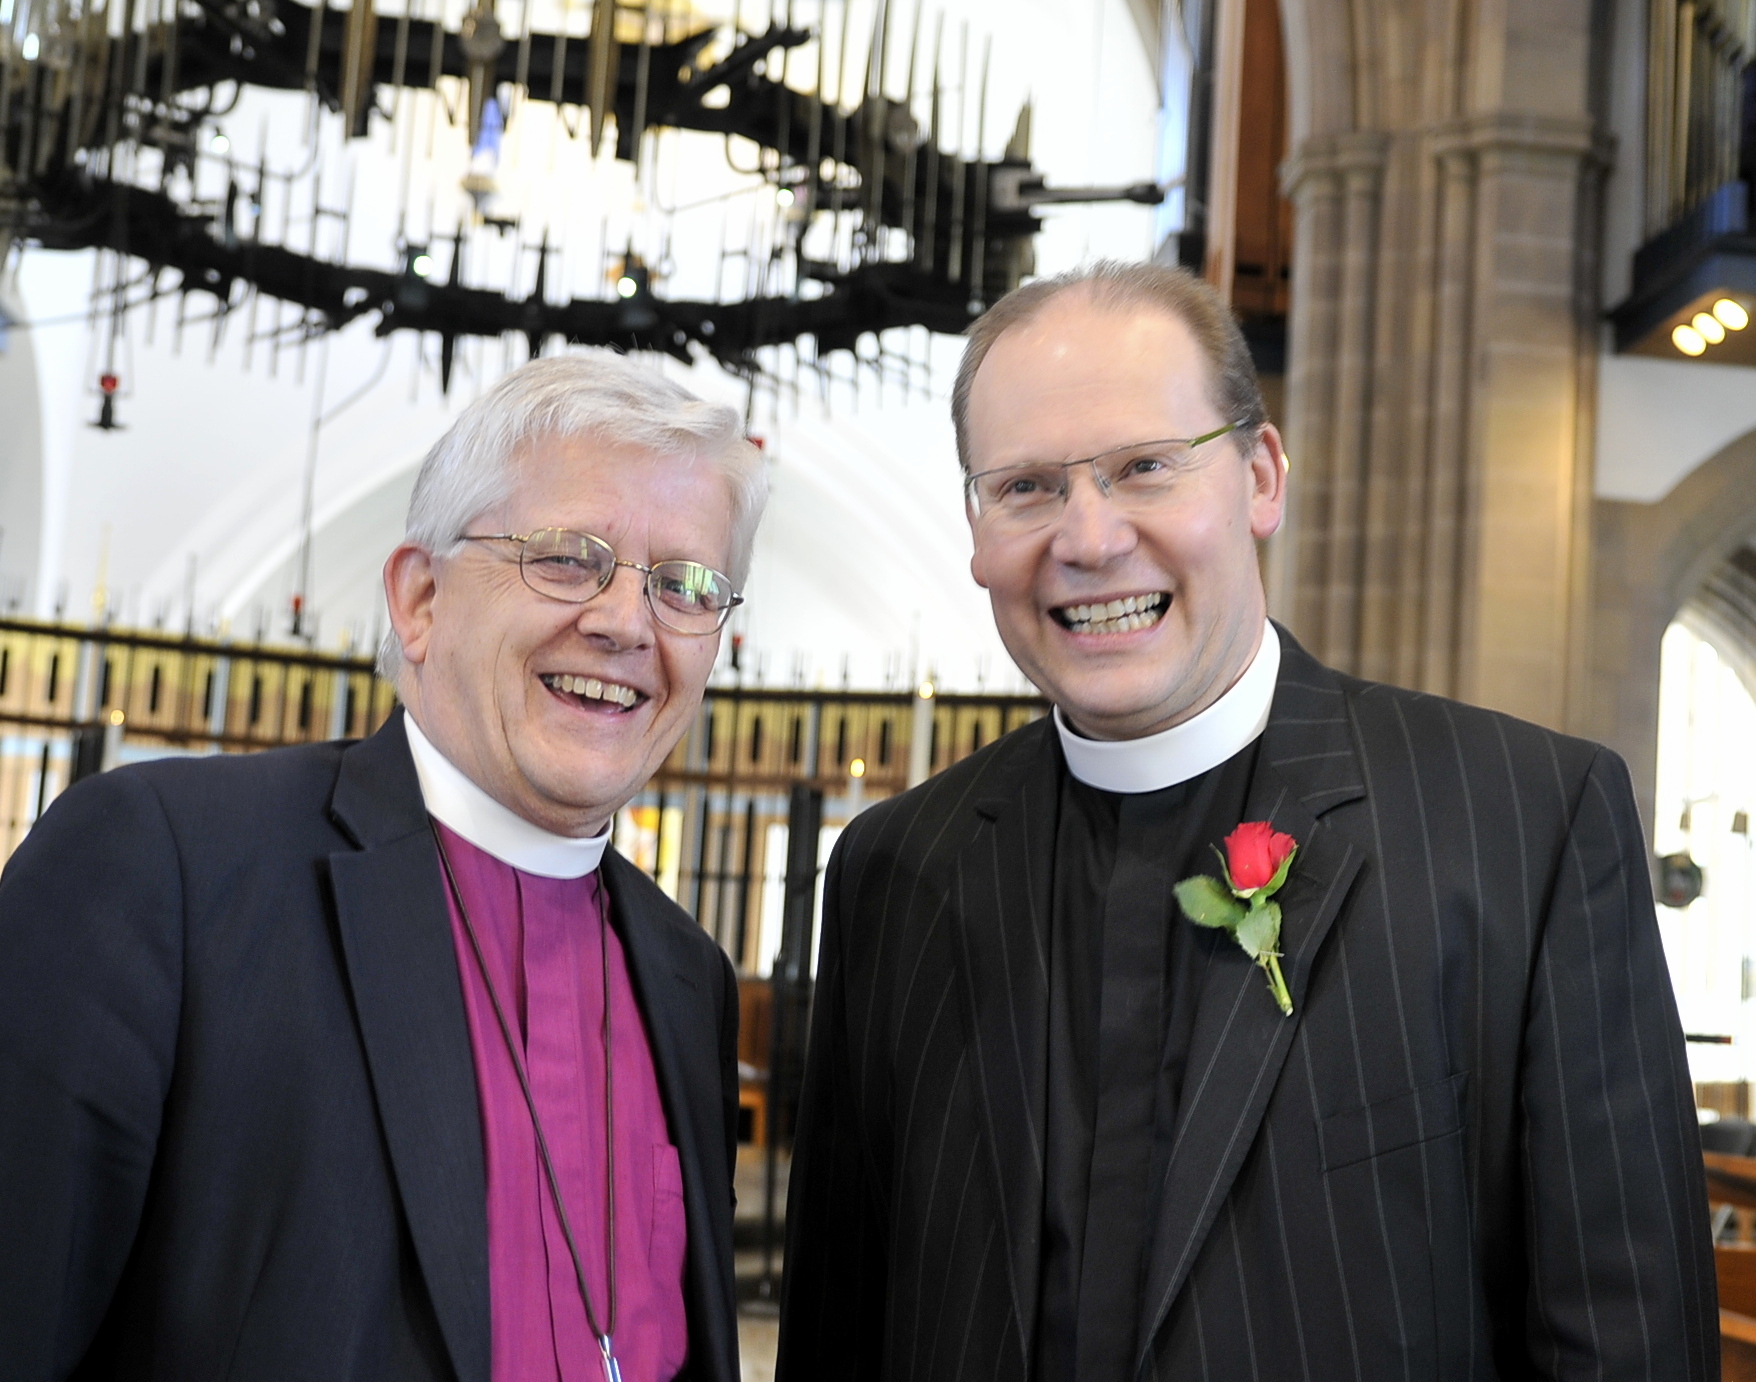 PICTURES GALLERY: New Dean gets warm welcome to ‘beautiful town’